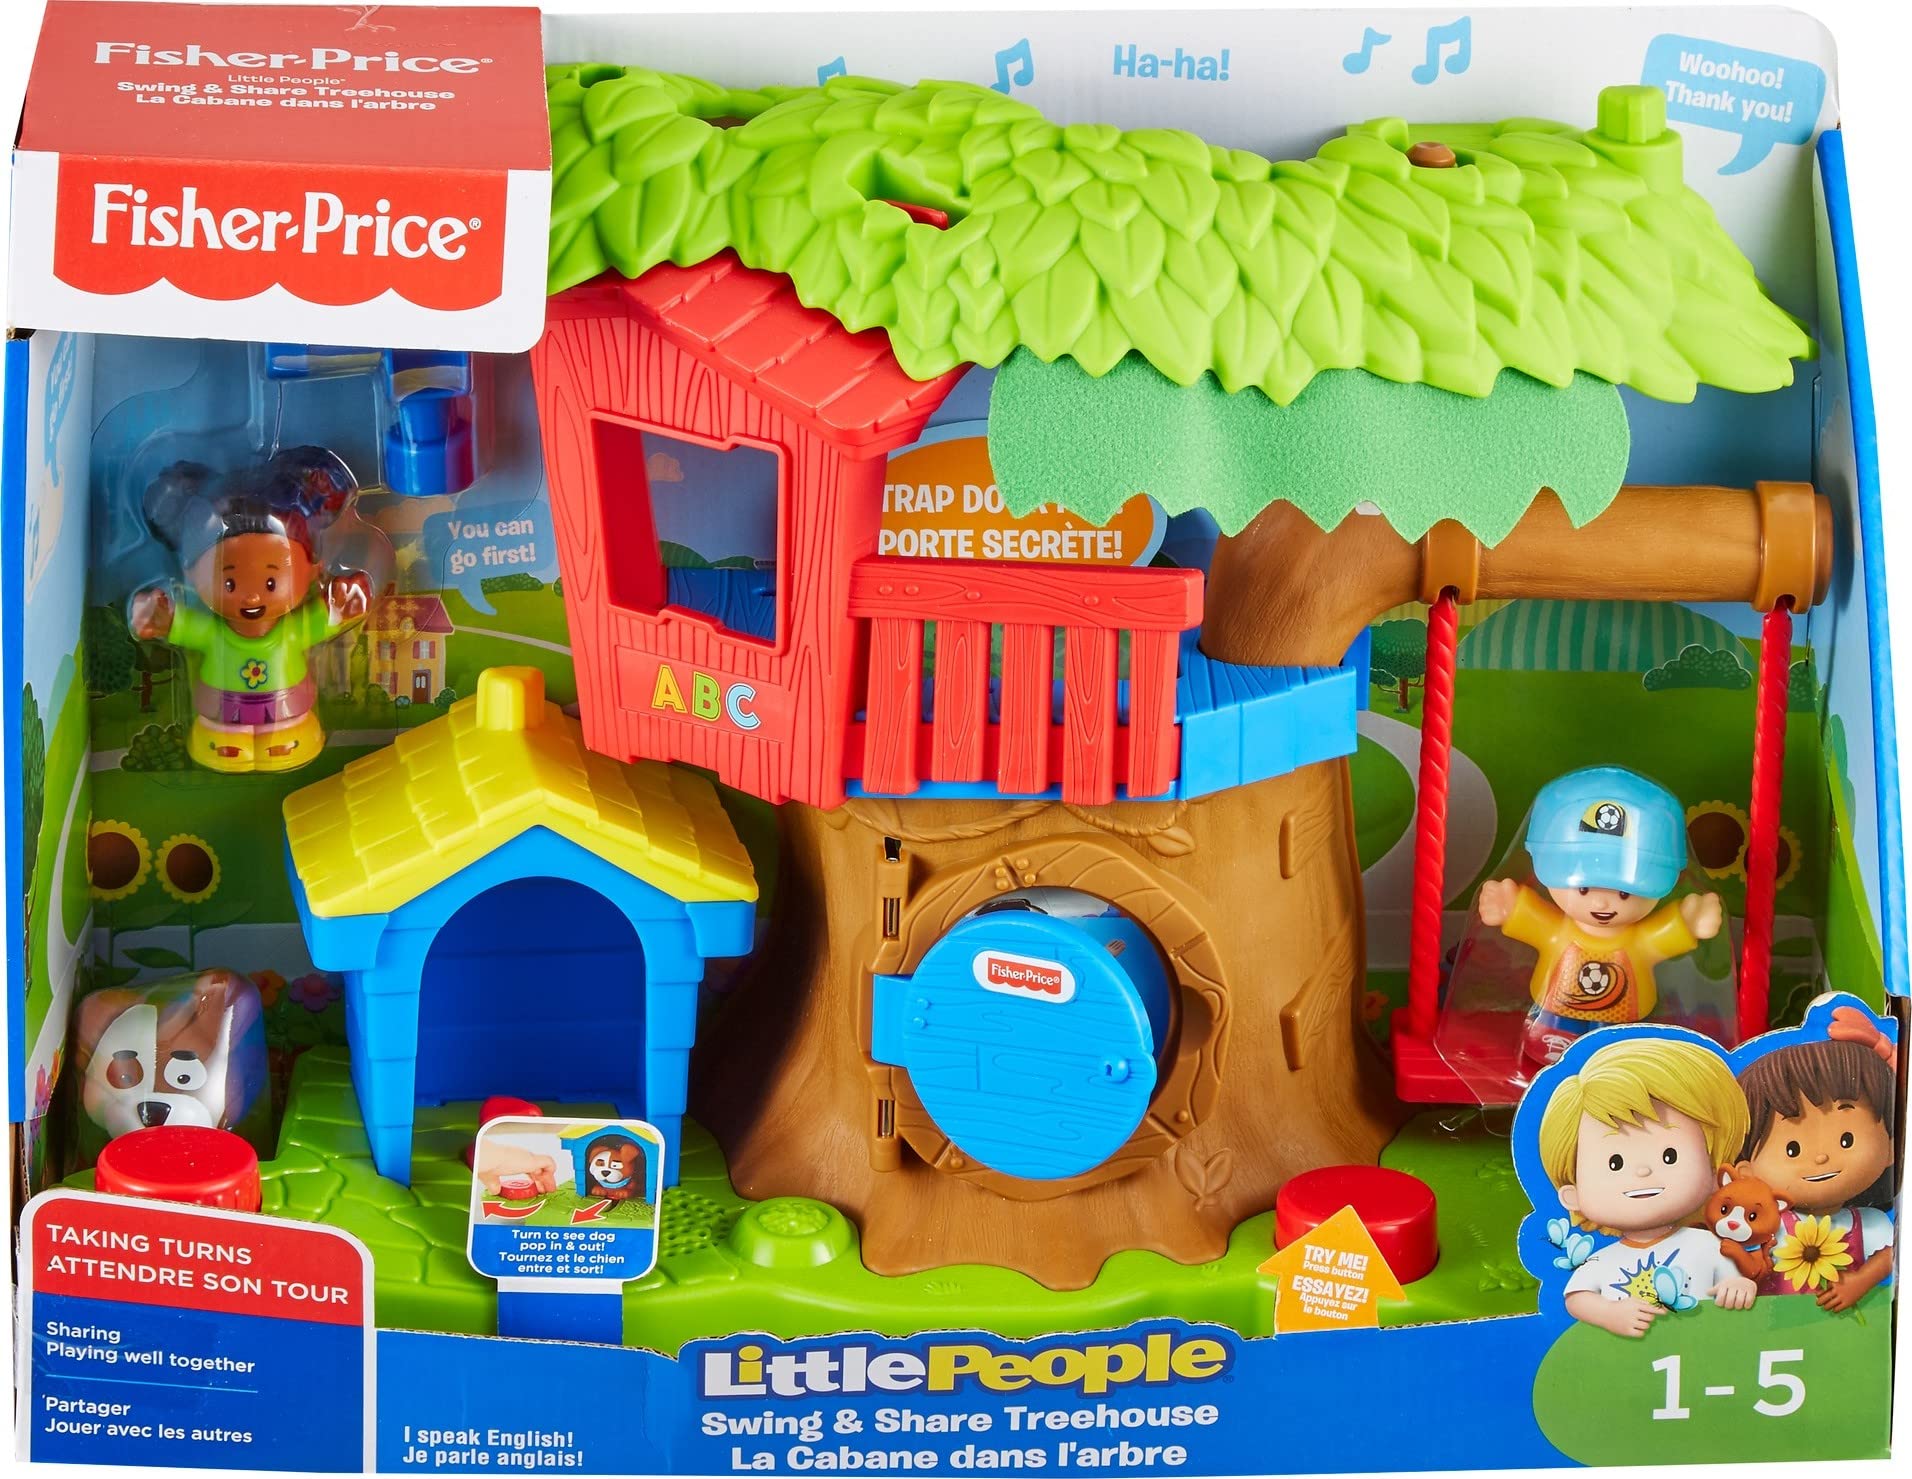 Fisher-Price Little People Toddler Musical Toy Swing & Share Treehouse Playset with 3 Figures for Pretend Play Ages 1+ Years (Amazon Exclusive)